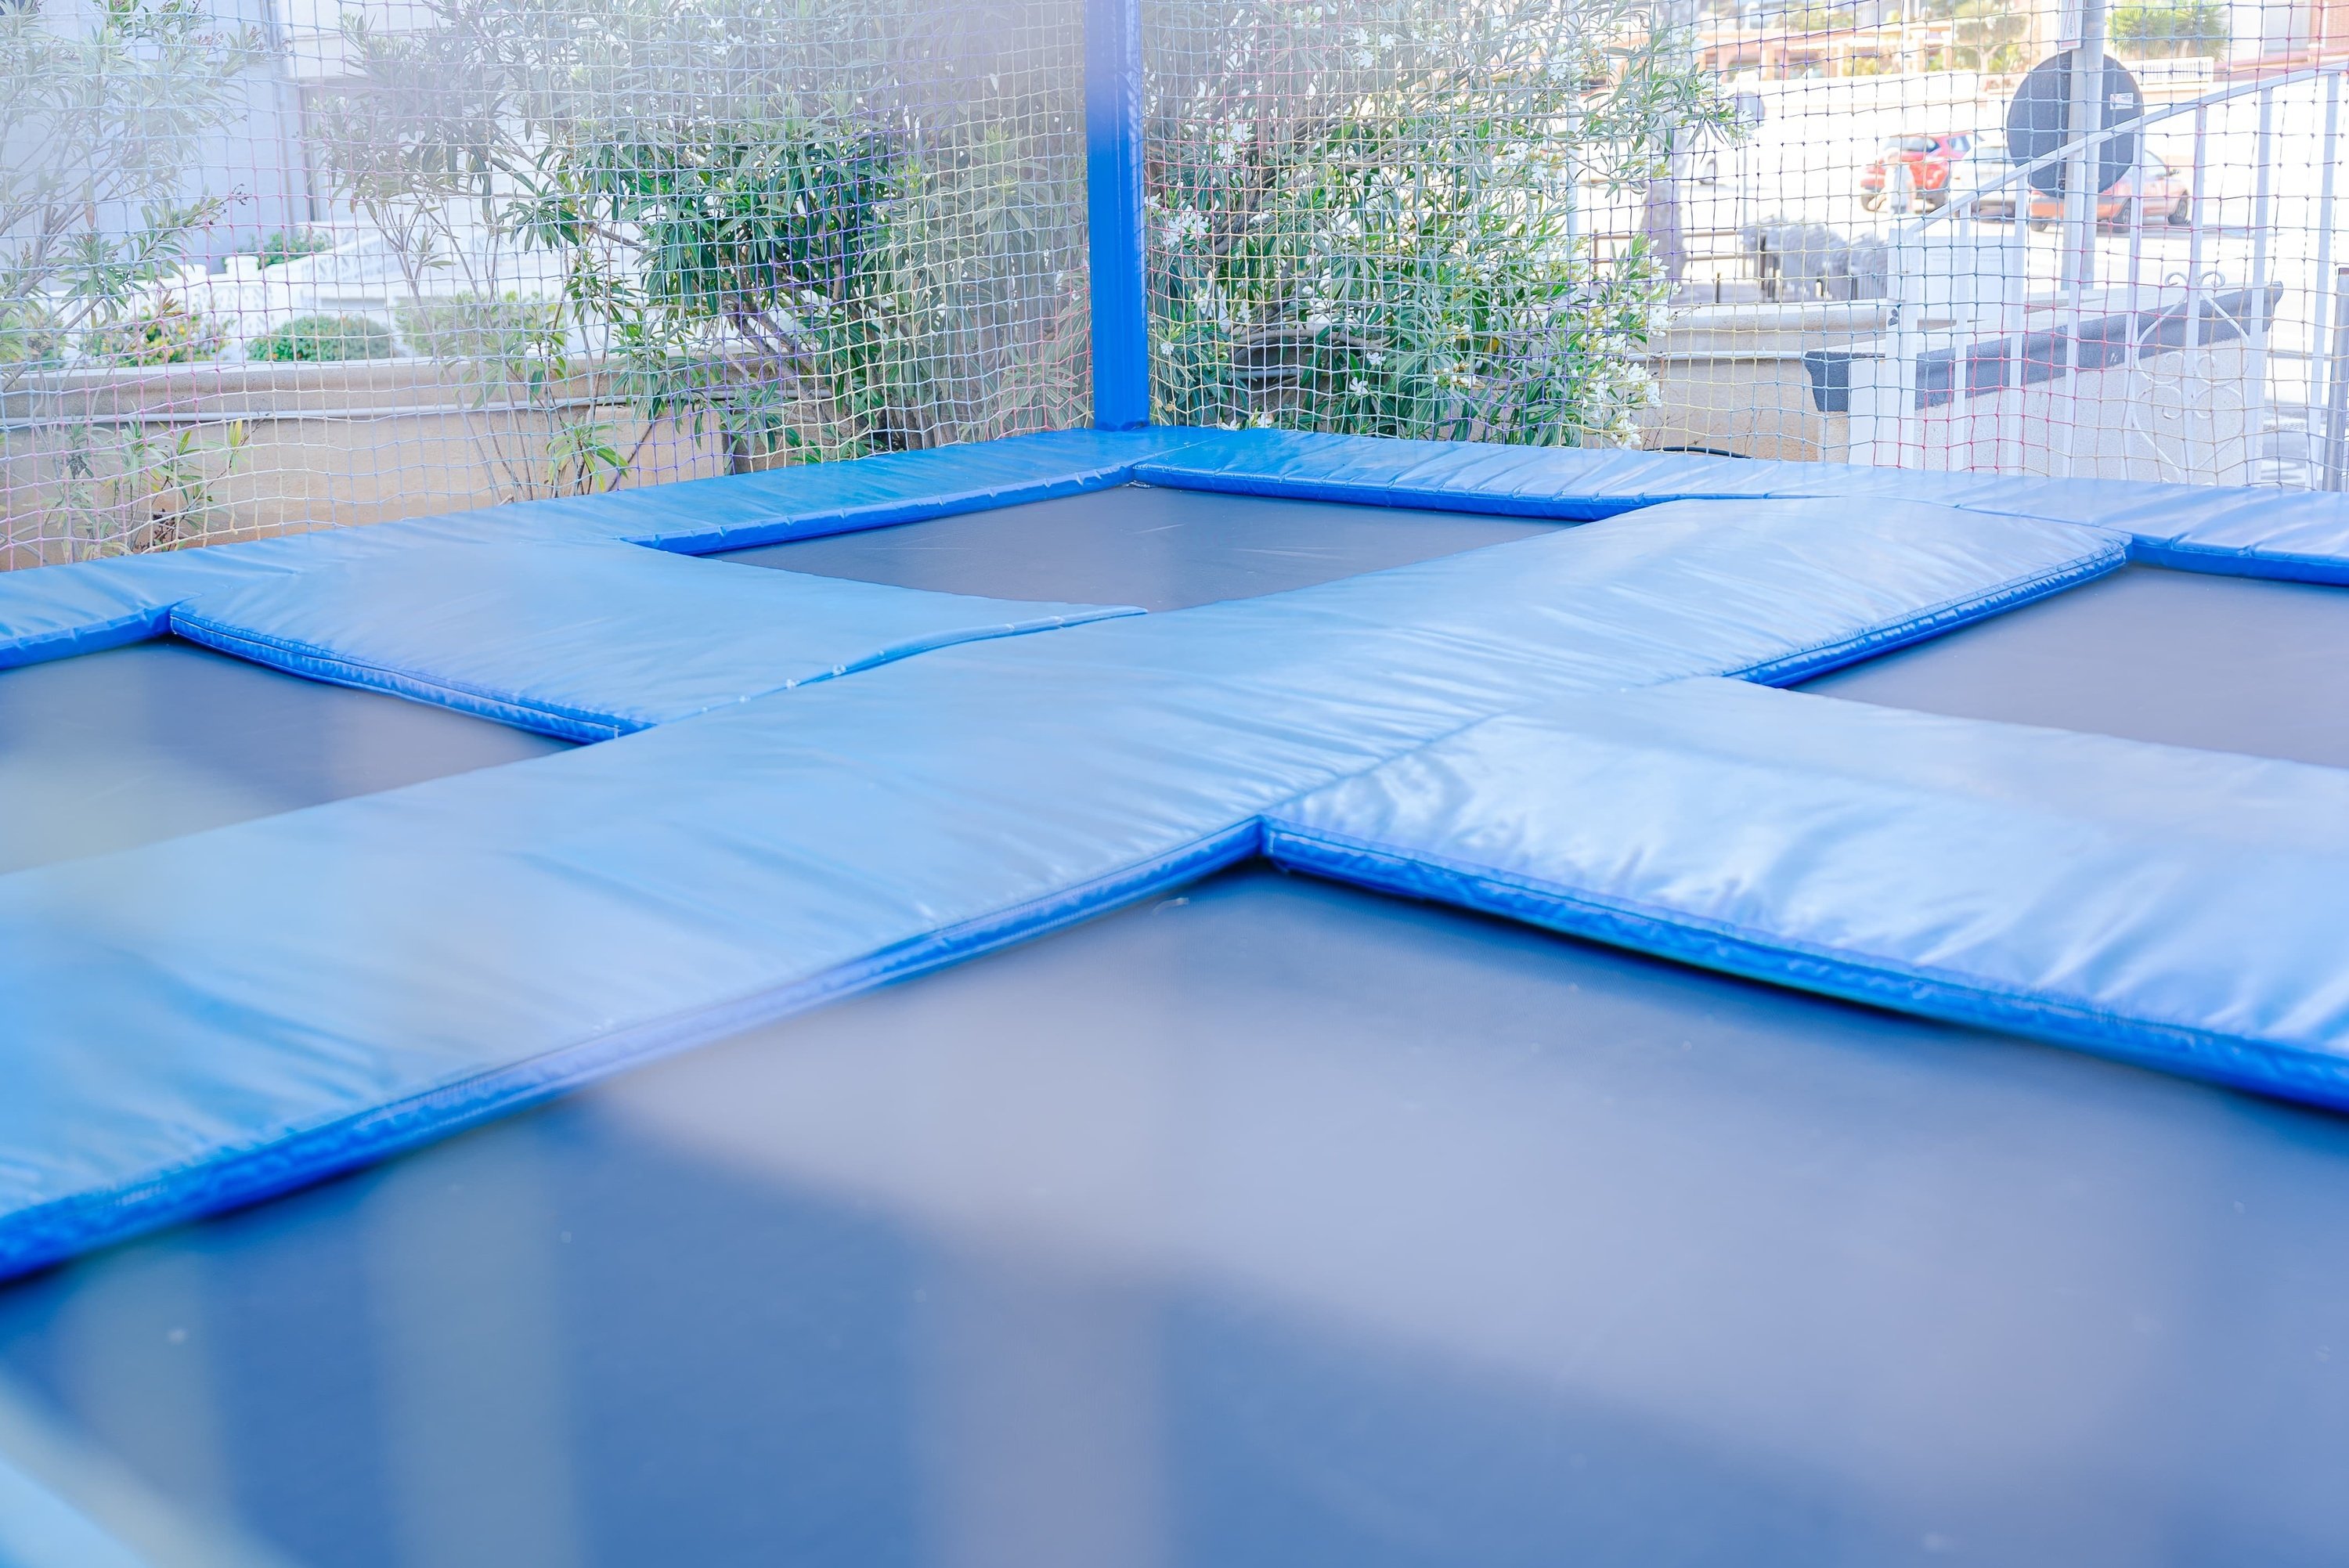 a trampoline with blue cushions and a fence around it